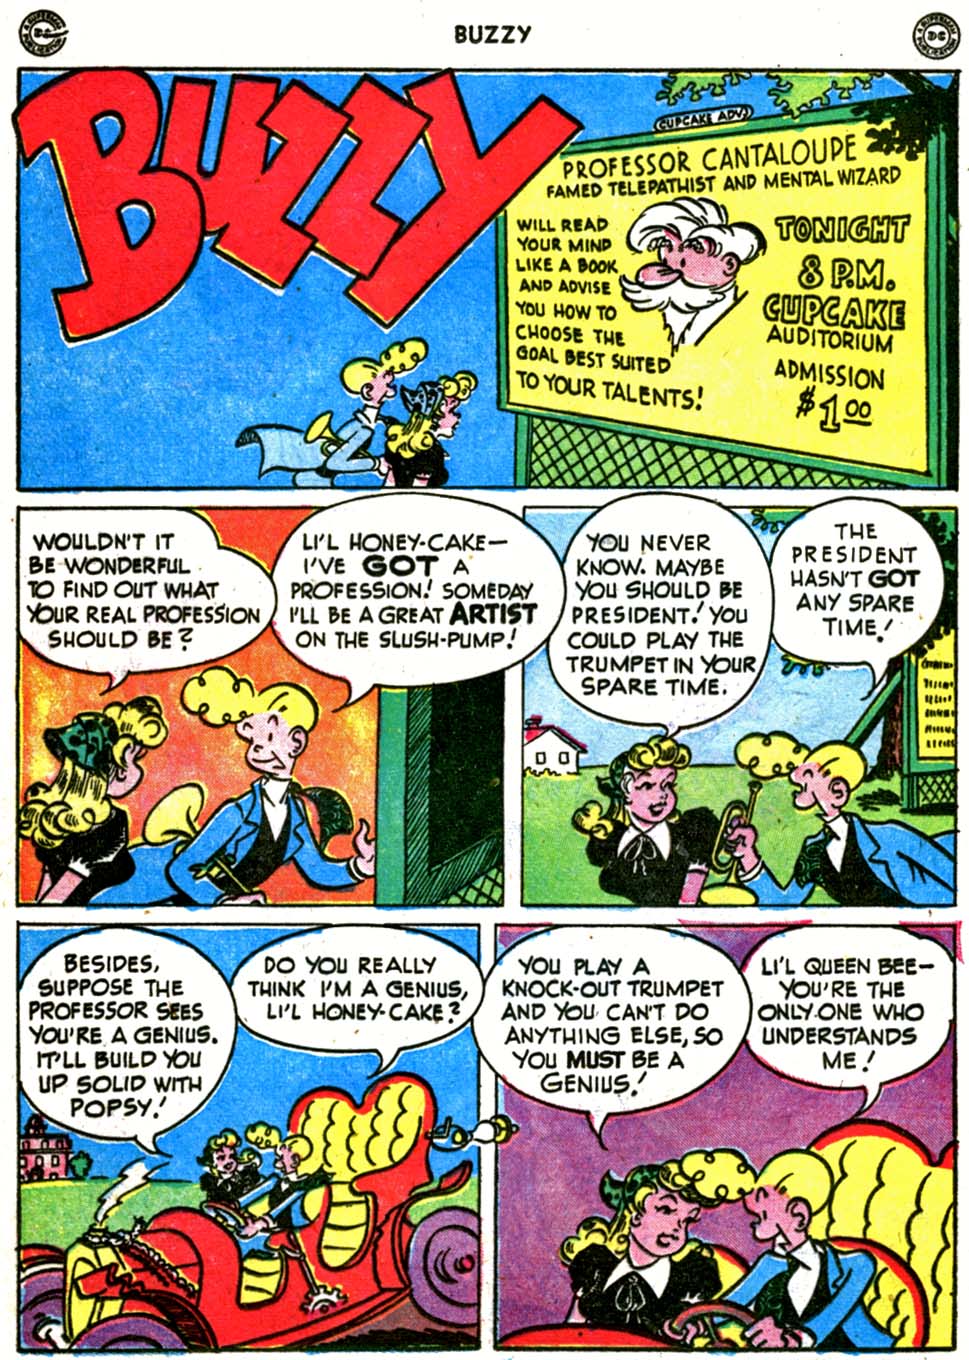 Read online Buzzy comic -  Issue #12 - 22